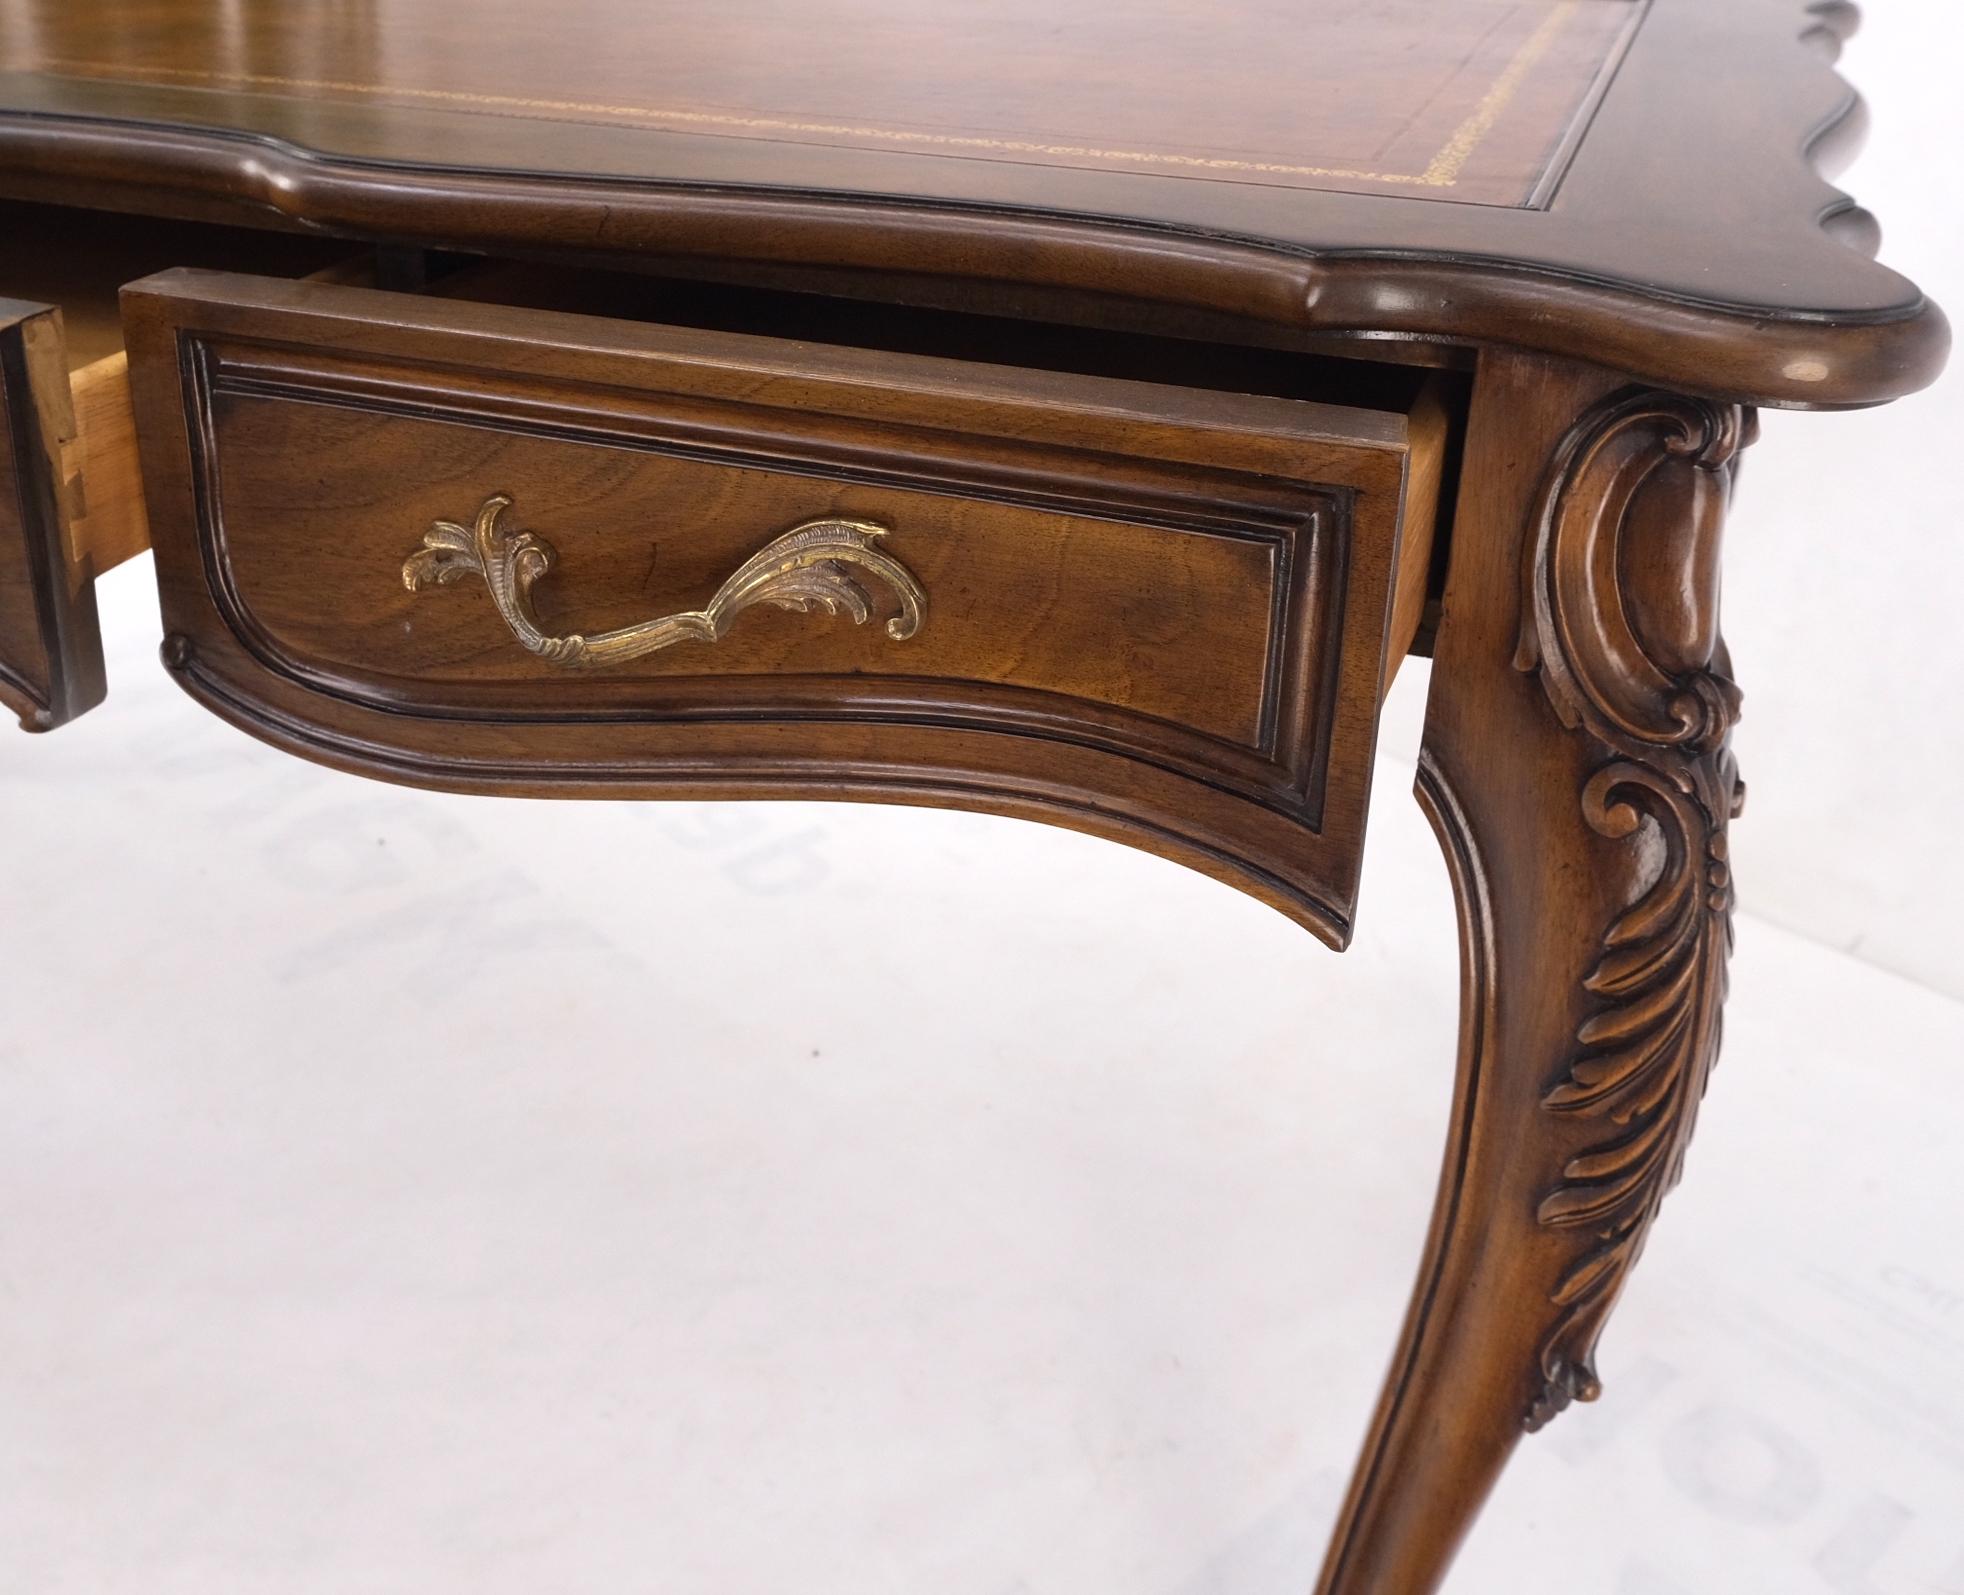 French Provincial Carved Walnut Embossed Leather Top Country 3 Drawer French Desk